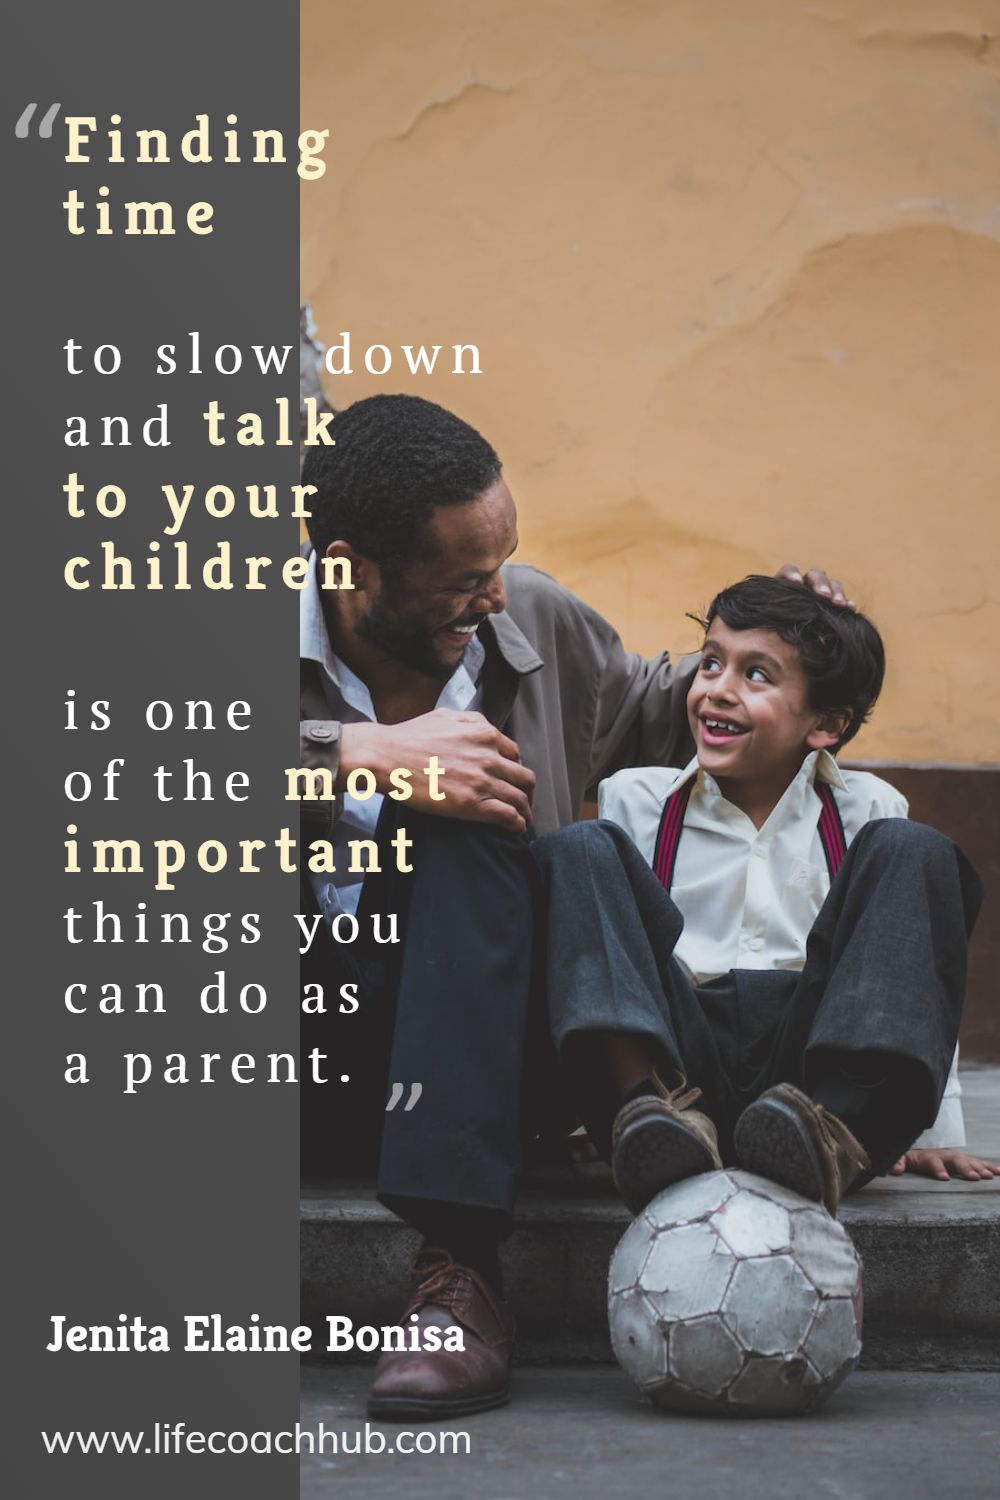 Finding time to slow down and talk to your children is one of the most important things you can do as a parent. Jenita Elaine Bonisa Coaching Quote